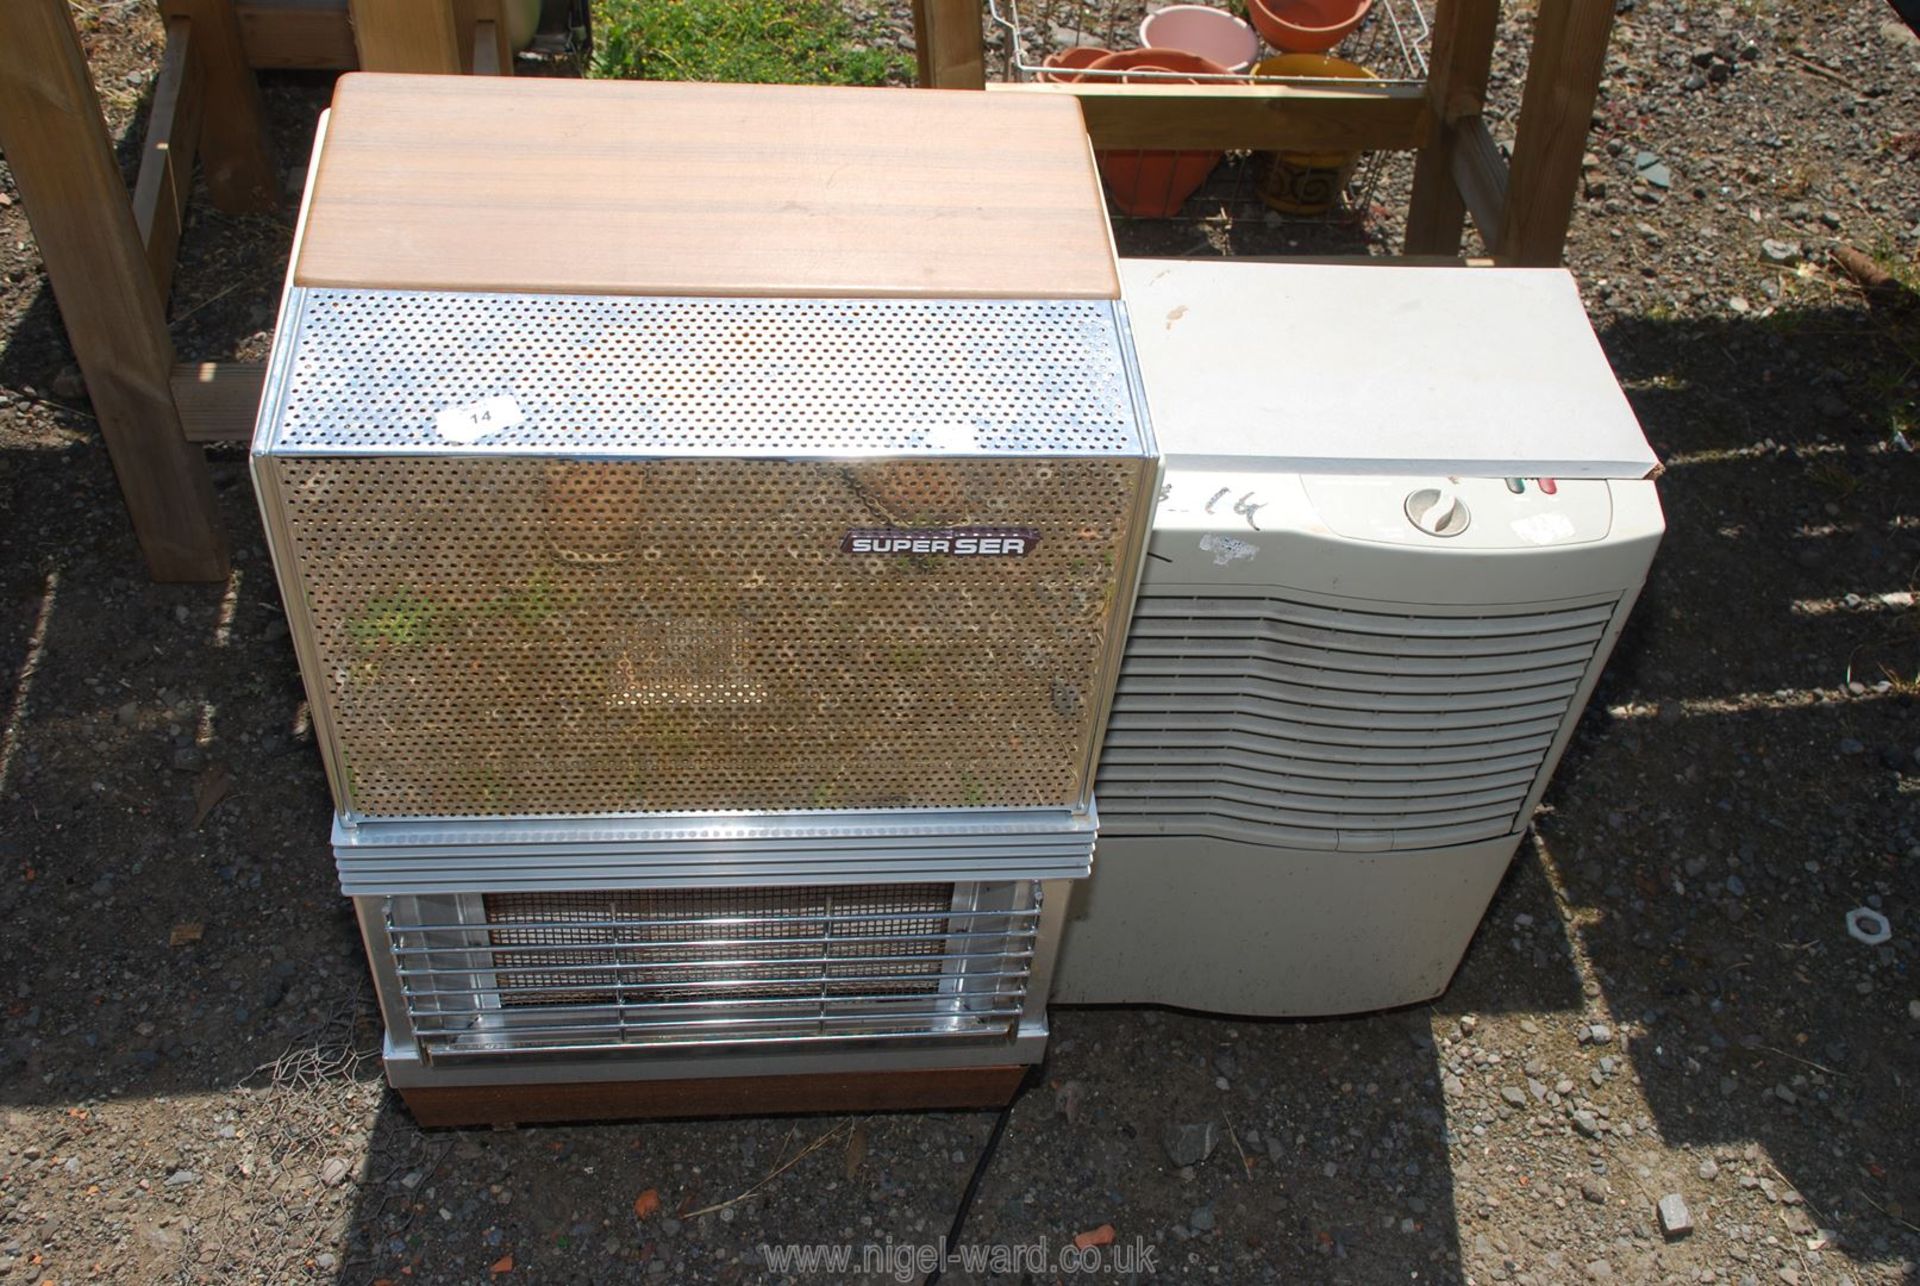 Superser gas heater and humidifier.